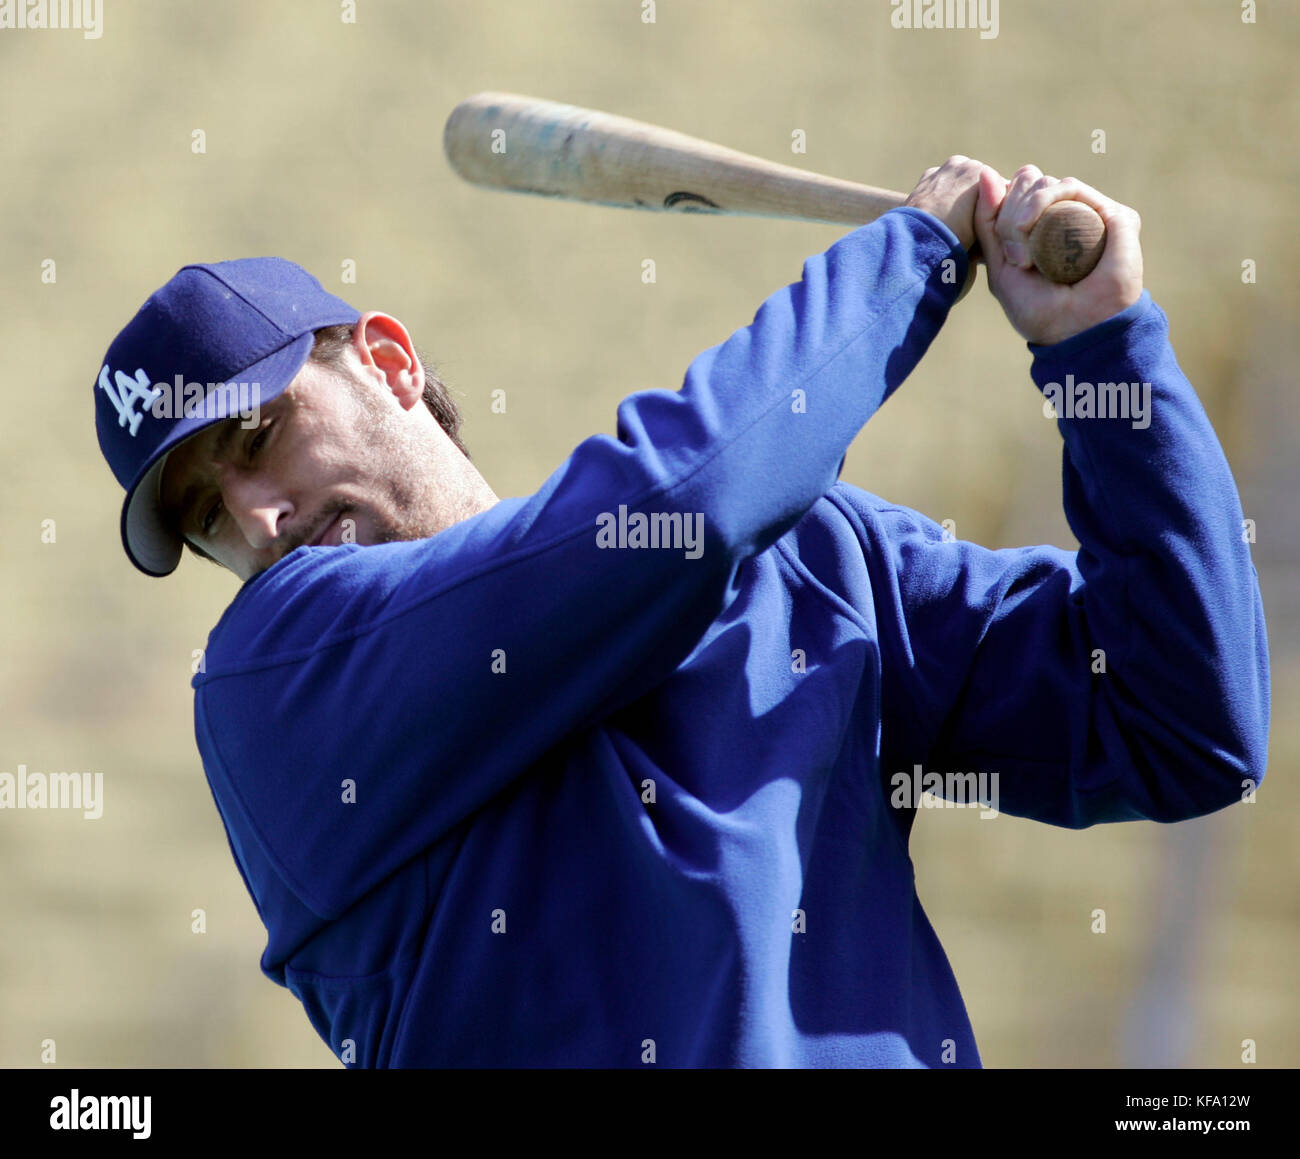 Los Angeles Dodgers' Nomar Garciaparra warms up with his bat before game 3 of the NLDS baseball series against the New York Mets in Los Angeles on Saturday, October 7, 2006. Photo by Francis Specker Stock Photo